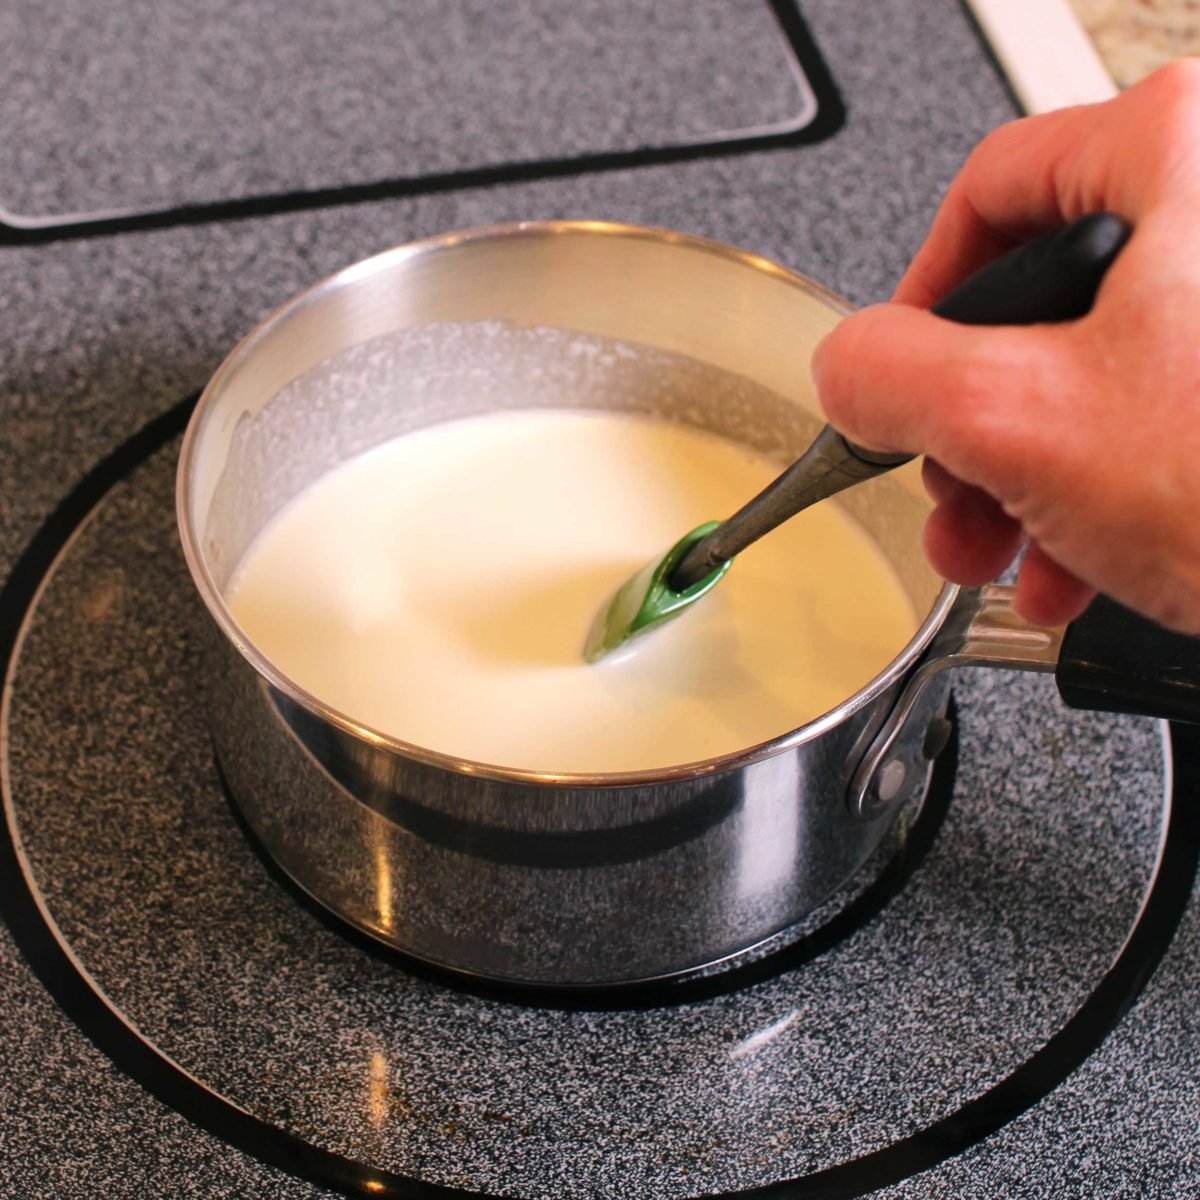 cream being stirred with a green spoon in a small silver pot